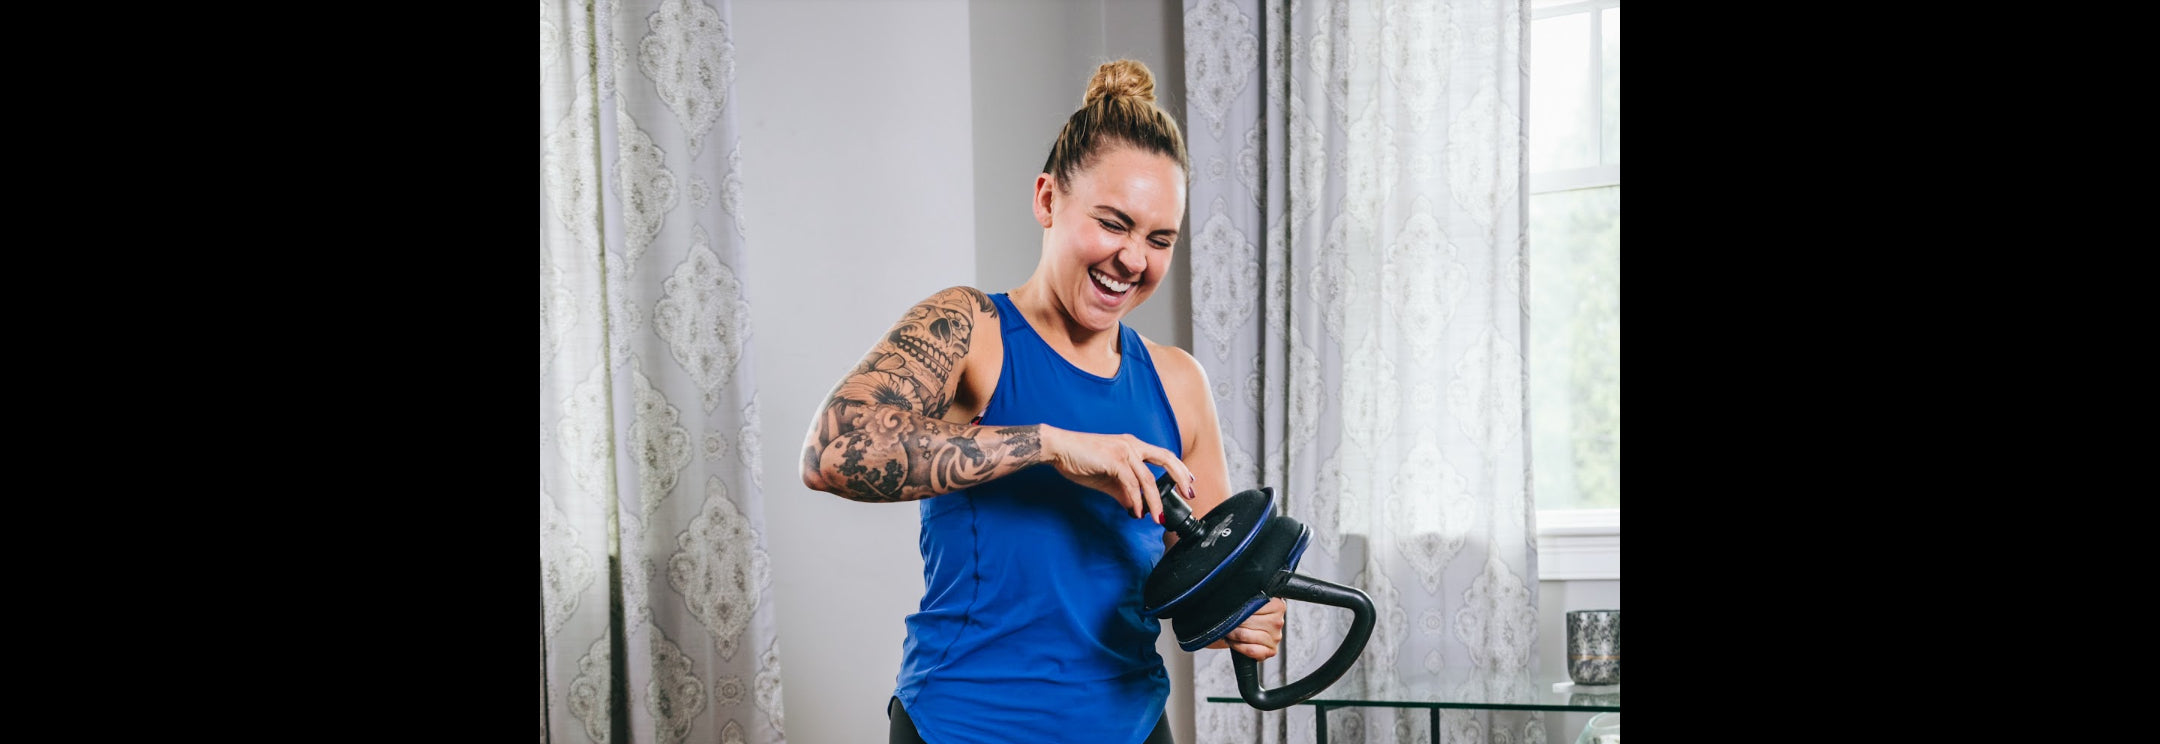 Image of a woman using her hyperwear adjustable weight soft kettlebell at home